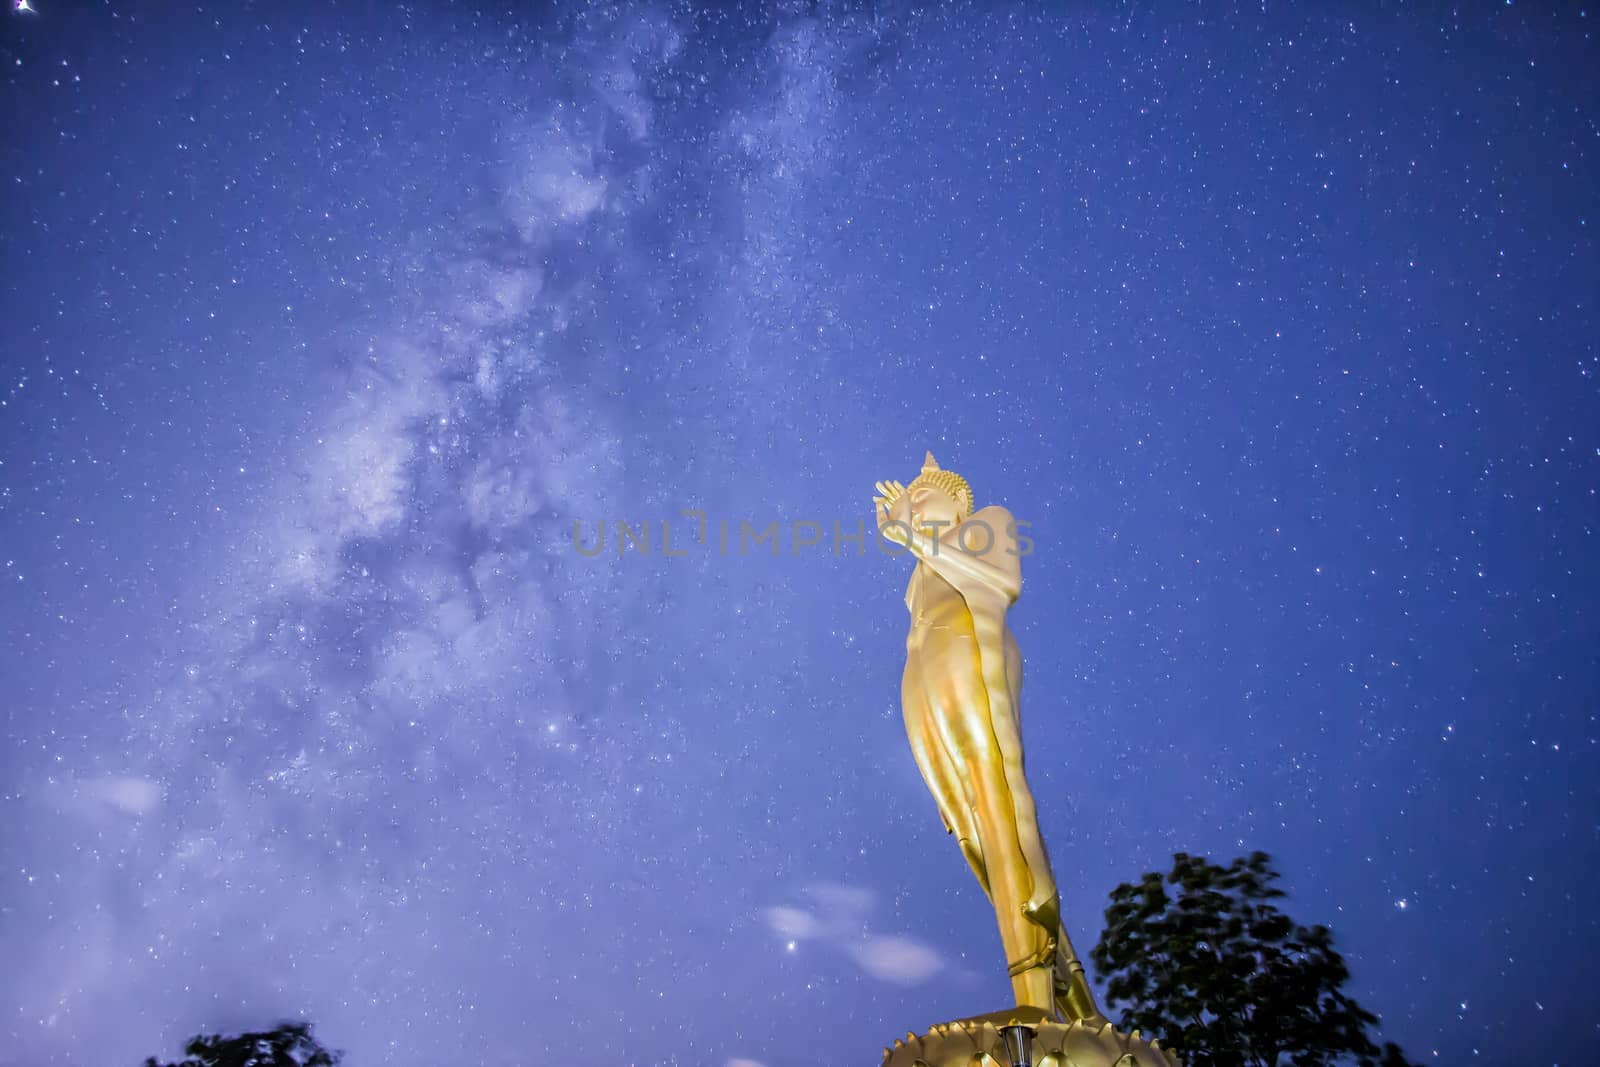 Buddha statue on the milky way background in Thailand by Gobba17